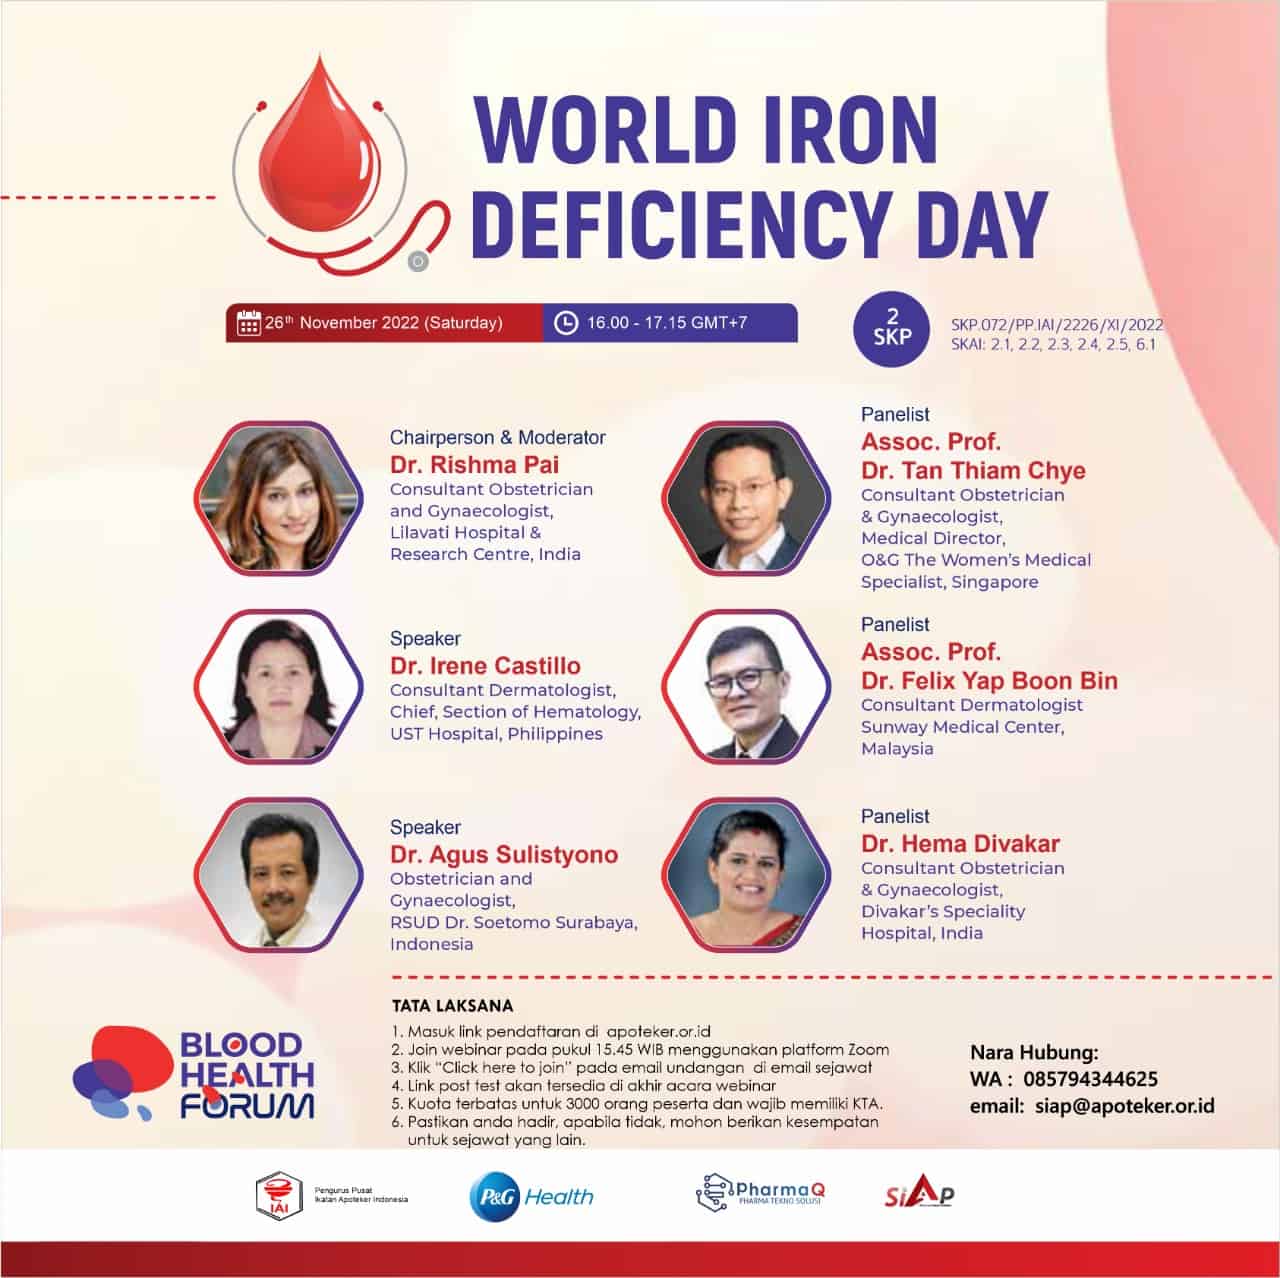 World Iron Deficiency Day